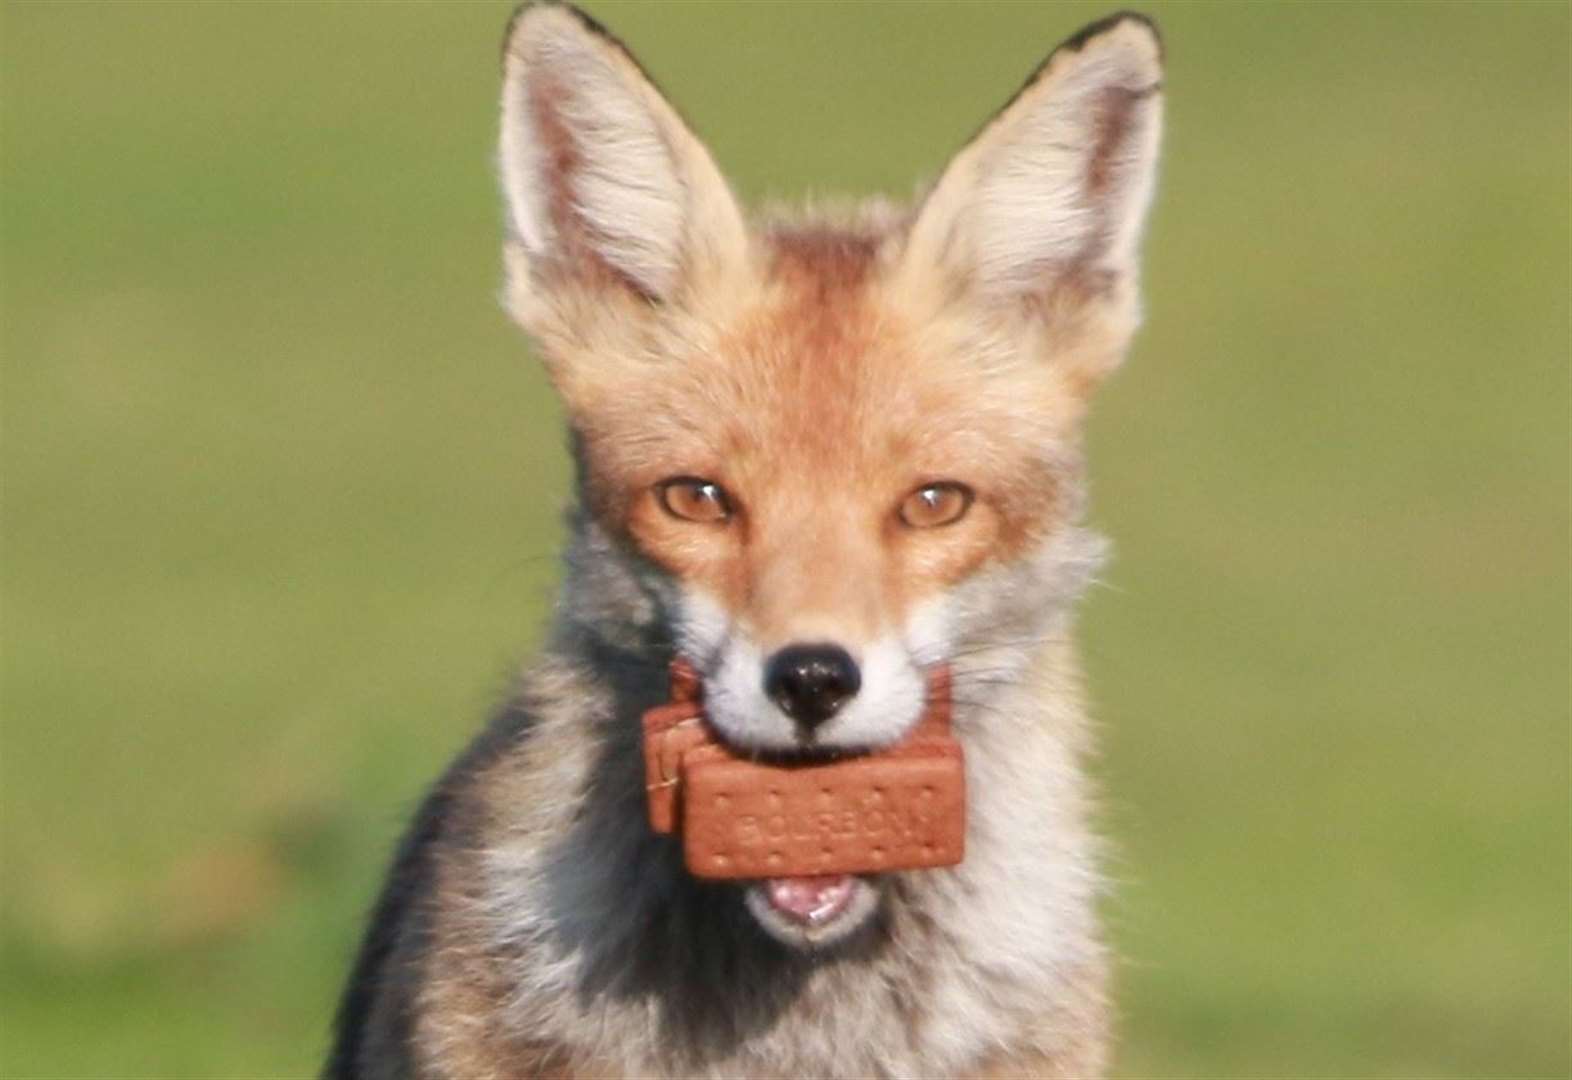 Fox's biscuits! Crafty critter snapped with mouth full of bourbons